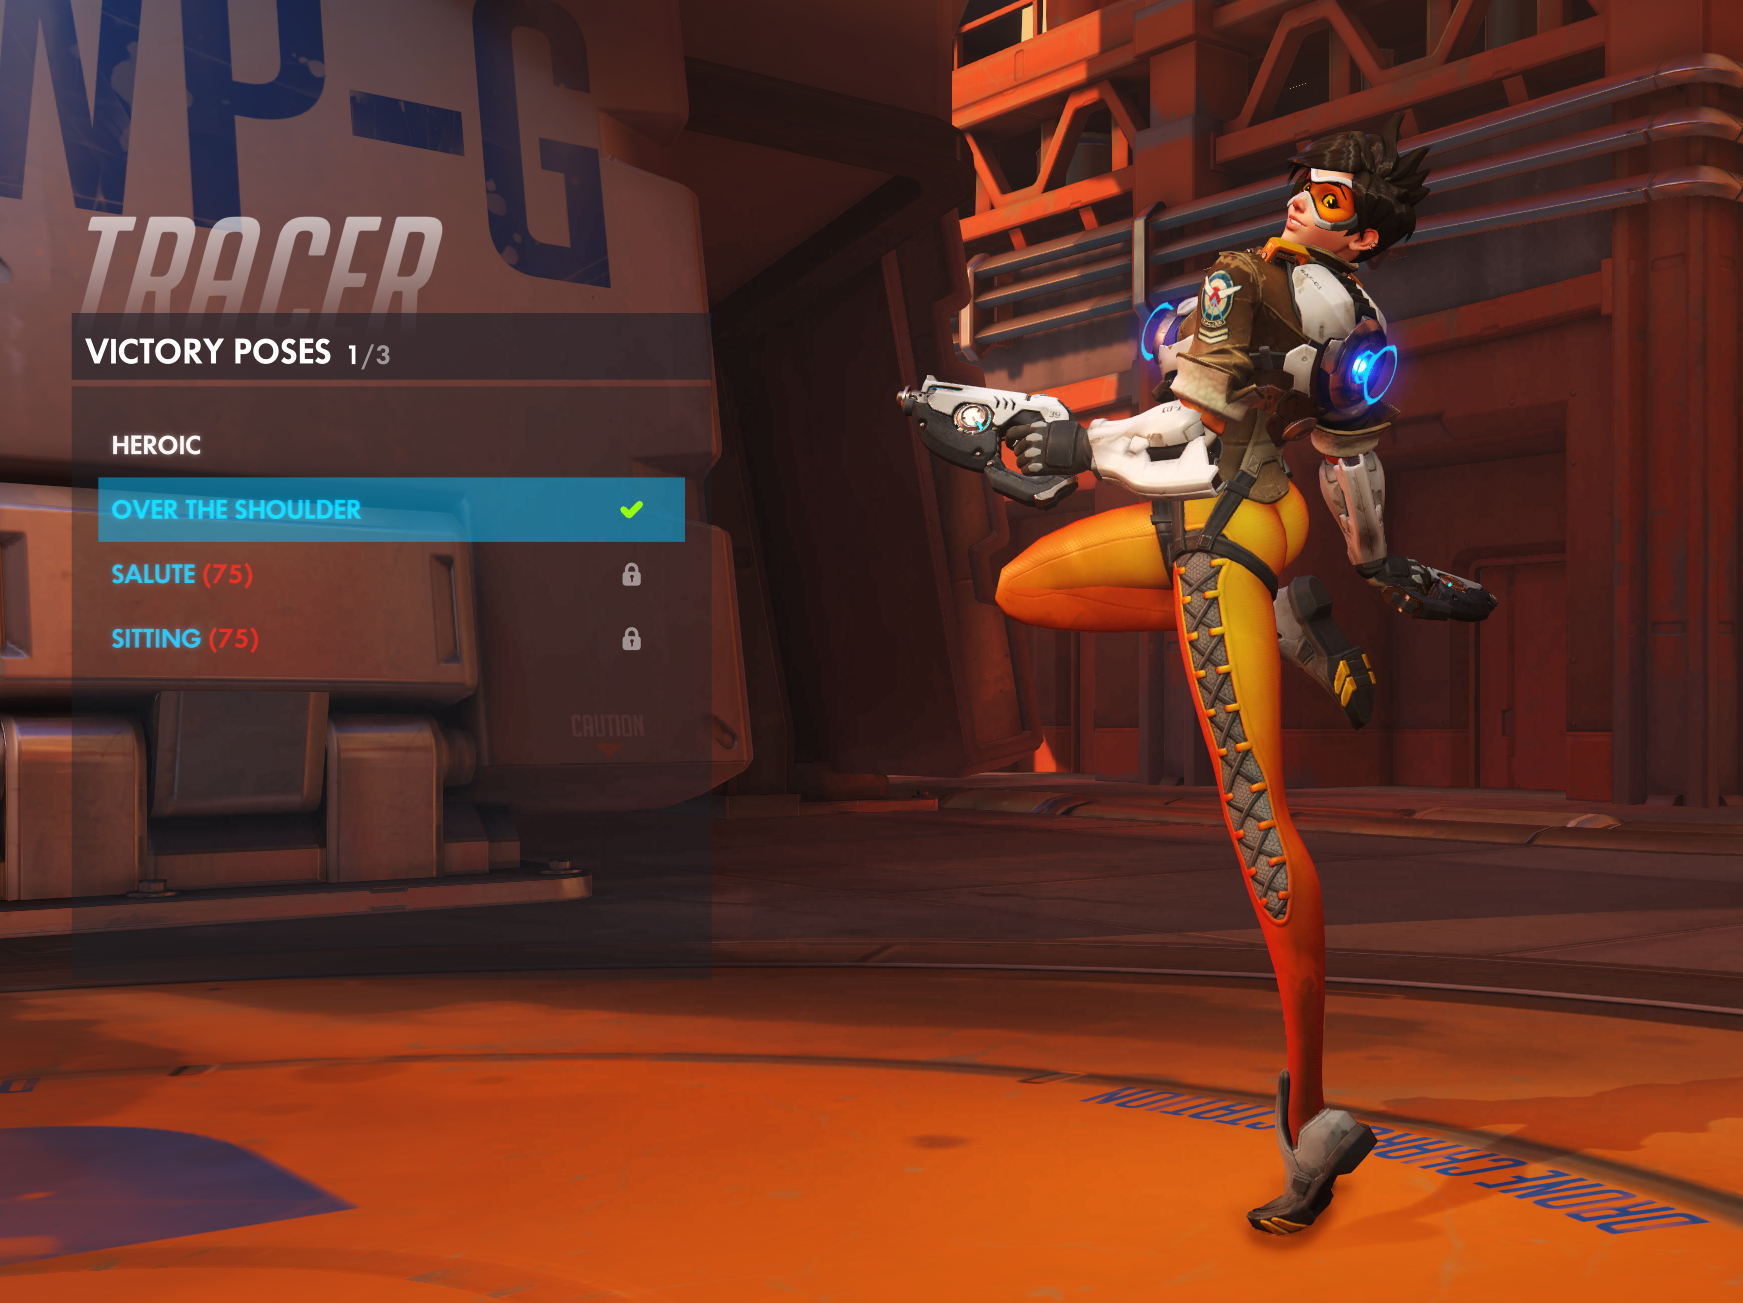 Tracer New Pose